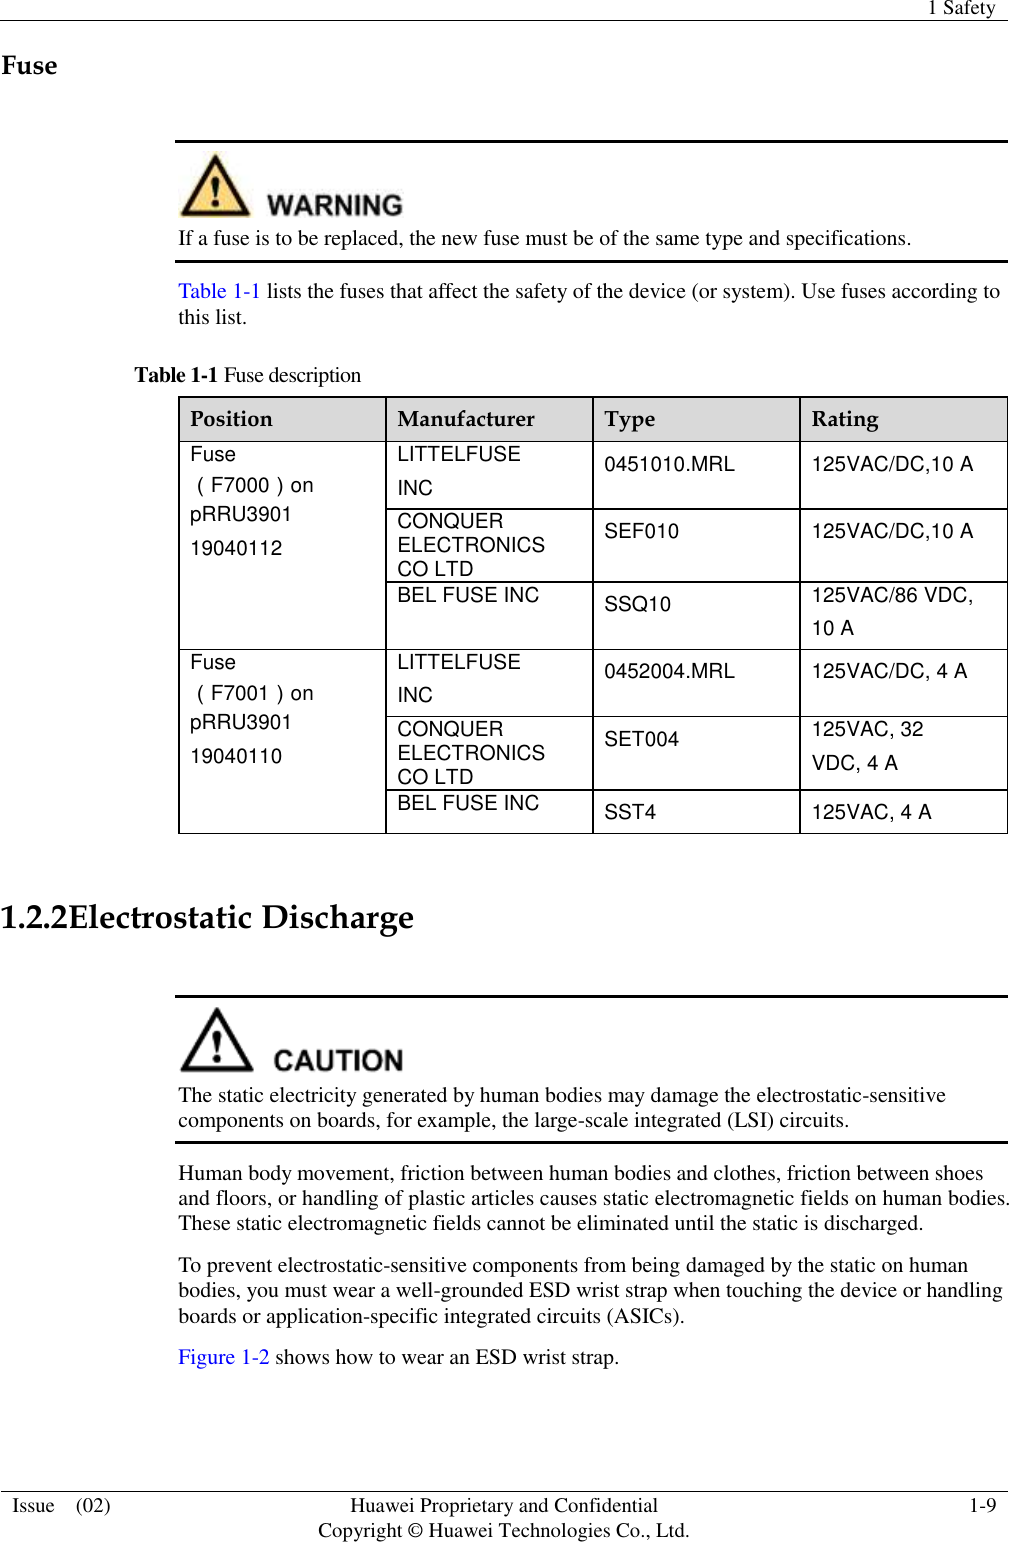   1 Safety  Issue    (02) Huawei Proprietary and Confidential                                     Copyright © Huawei Technologies Co., Ltd. 1-9  Fuse   If a fuse is to be replaced, the new fuse must be of the same type and specifications. Table 1-1 lists the fuses that affect the safety of the device (or system). Use fuses according to this list. Table 1-1 Fuse description Position Manufacturer Type Rating Fuse （F7000）on pRRU3901 19040112 LITTELFUSE INC 0451010.MRL 125VAC/DC,10 A CONQUER ELECTRONICS CO LTD SEF010 125VAC/DC,10 A BEL FUSE INC SSQ10 125VAC/86 VDC, 10 A Fuse （F7001）on pRRU3901 19040110 LITTELFUSE INC 0452004.MRL 125VAC/DC, 4 A CONQUER ELECTRONICS CO LTD SET004 125VAC, 32 VDC, 4 A BEL FUSE INC SST4 125VAC, 4 A  1.2.2Electrostatic Discharge   The static electricity generated by human bodies may damage the electrostatic-sensitive components on boards, for example, the large-scale integrated (LSI) circuits. Human body movement, friction between human bodies and clothes, friction between shoes and floors, or handling of plastic articles causes static electromagnetic fields on human bodies. These static electromagnetic fields cannot be eliminated until the static is discharged.   To prevent electrostatic-sensitive components from being damaged by the static on human bodies, you must wear a well-grounded ESD wrist strap when touching the device or handling boards or application-specific integrated circuits (ASICs). Figure 1-2 shows how to wear an ESD wrist strap. 